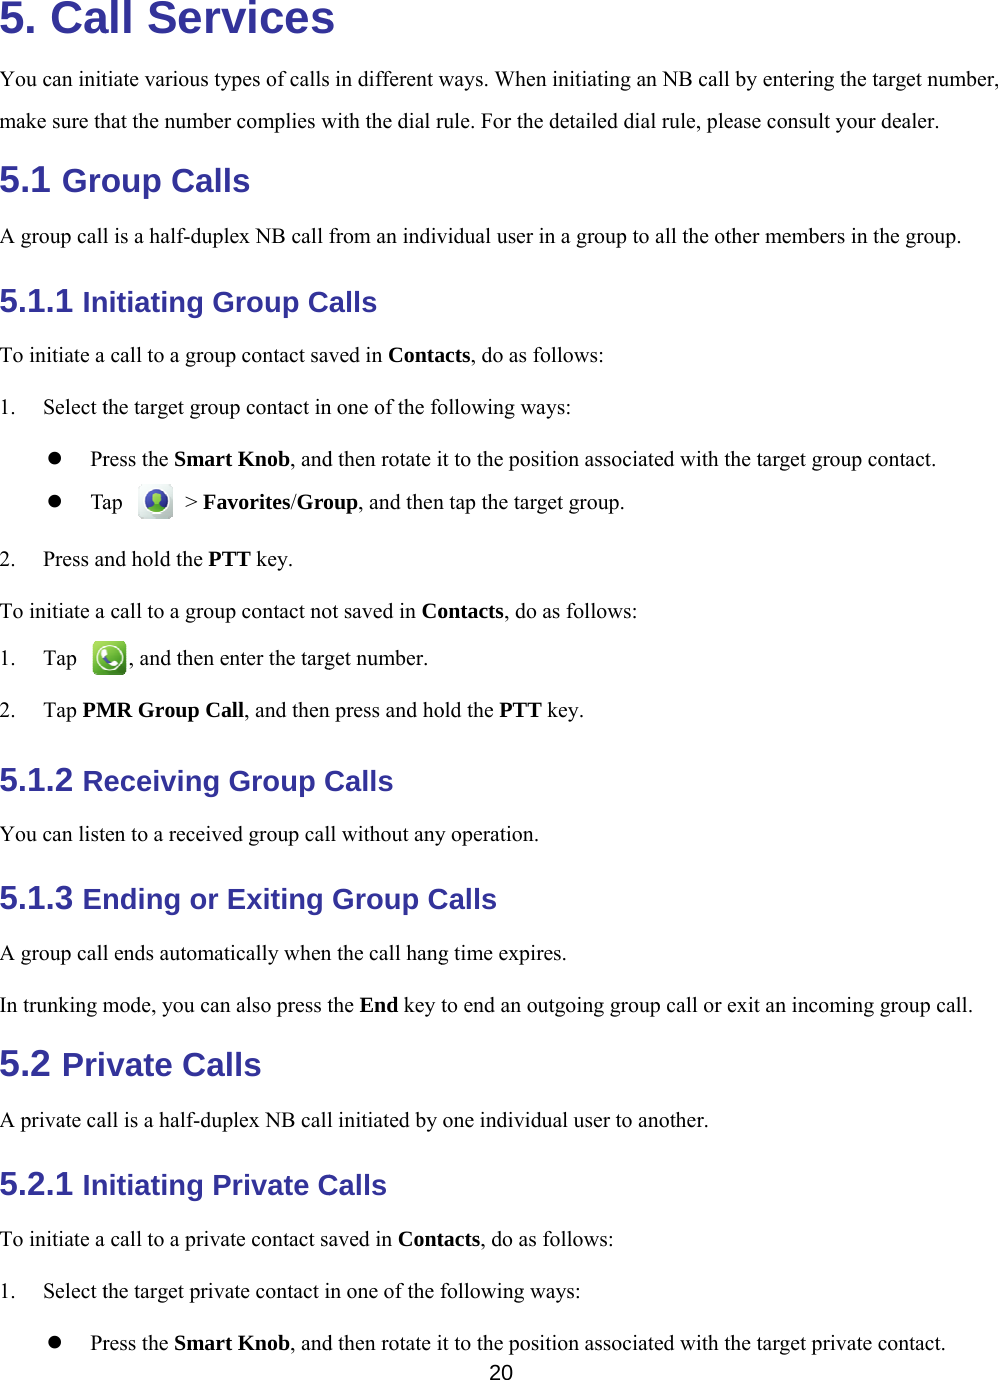    5. CaYou can initmake sure th5.1 GroA group call5.1.1 InTo initiate a 1. Select t Pr Ta2. Press anTo initiate a 1. Tap 2. Tap PM5.1.2 ReYou can list5.1.3 EnA group callIn trunking m5.2 PriA private ca5.2.1 InTo initiate a 1. Select t Prall Sertiate various that the numbeoup Call is a half-dupnitiating G call to a grouthe target groress the Smarap  &gt; Fnd hold the P call to a grou, and then MR Group Ceceivingten to a receivnding orl ends automamode, you cavate Caall is a half-dunitiating P call to a privthe target privress the Smarrvicestypes of callser complies wlls plex NB call Group Cup contact savoup contact inrt Knob, andavorites/GroPTT key. up contact noenter the targCall, and theng Group Cved group calr Exiting atically whenan also press talls uplex NB callPrivate Cvate contact svate contact irt Knob, ands s in different wwith the dial rfrom an indivalls ved in Contan one of the fod then rotate ioup, and thenot saved in Coget number.n press and hoCalls ll without anyGroup Cn the call hangthe End key l initiated by Calls aved in Contin one of the fd then rotate i20 ways. When irule. For the dvidual user inacts, do as folollowing wayit to the positin tap the targeontacts, do aold the PTT ky operation.Calls g time expireto end an outone individutacts, do as fofollowing wait to the positiinitiating an Ndetailed dial rn a group to allows: ys:  ion associatedet group. s follows: key. s. tgoing group al user to anoollows: ays:  ion associatedNB call by enrule, please cll the other md with the tarcall or exit another. d with the tarntering the taronsult your dmembers in thrget group conn incoming grget private corget number, dealer. he group. ntact. group call. ontact. 